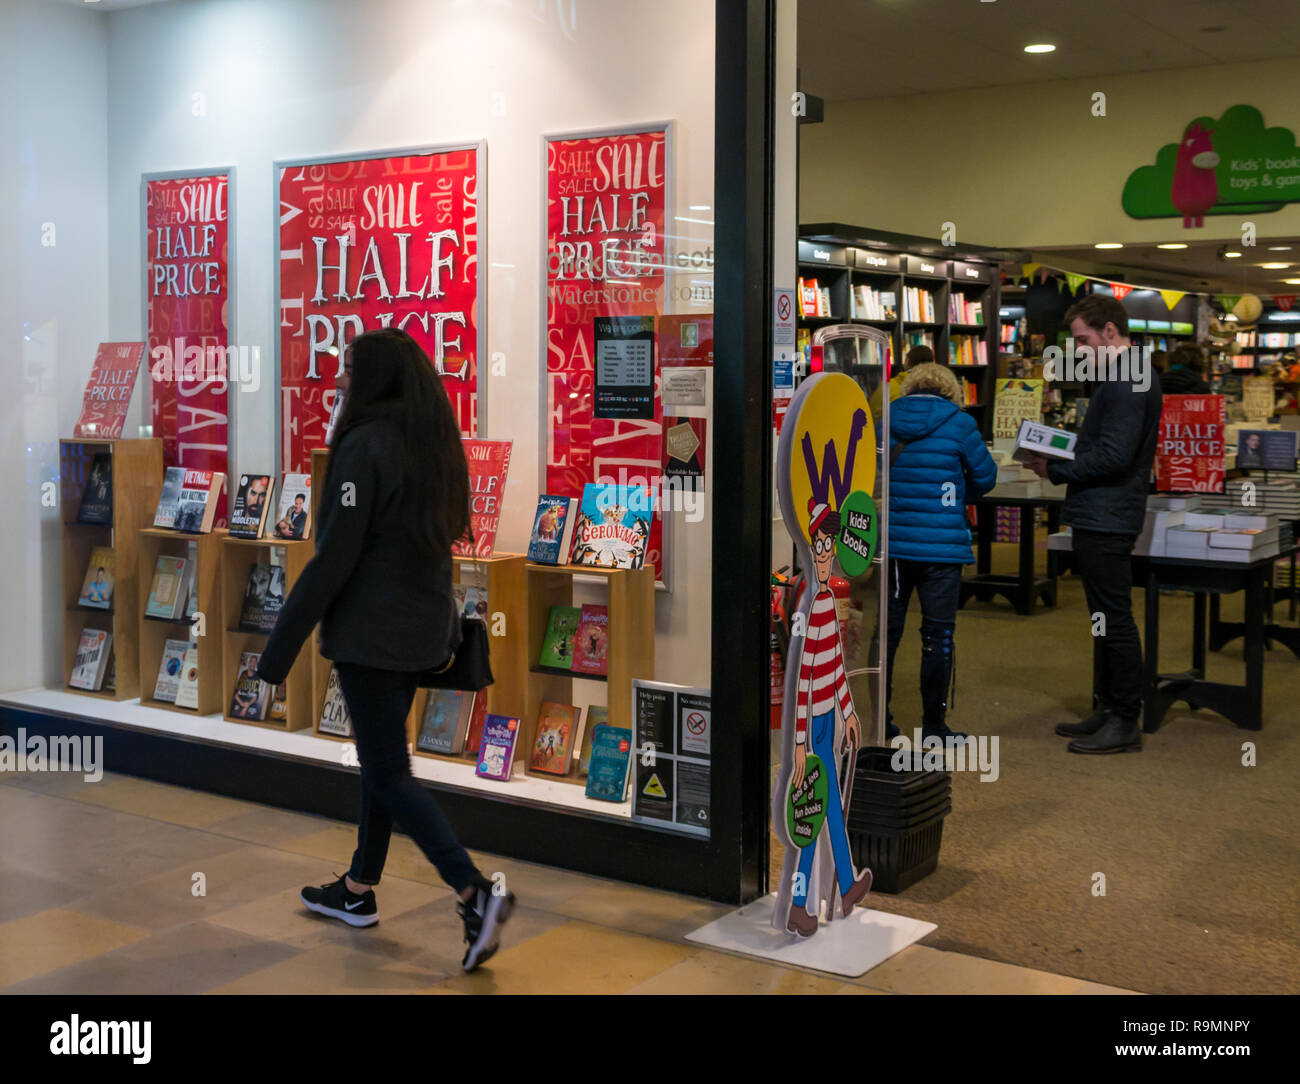 Ocean Terminal shopping centre, Leith, Edinburgh, Scotland, United Kingdom, 26th December 2018. Waterstones book store front advertising a half price Boxing Day sale with shoppers browsing and walking past the shop window display Stock Photo